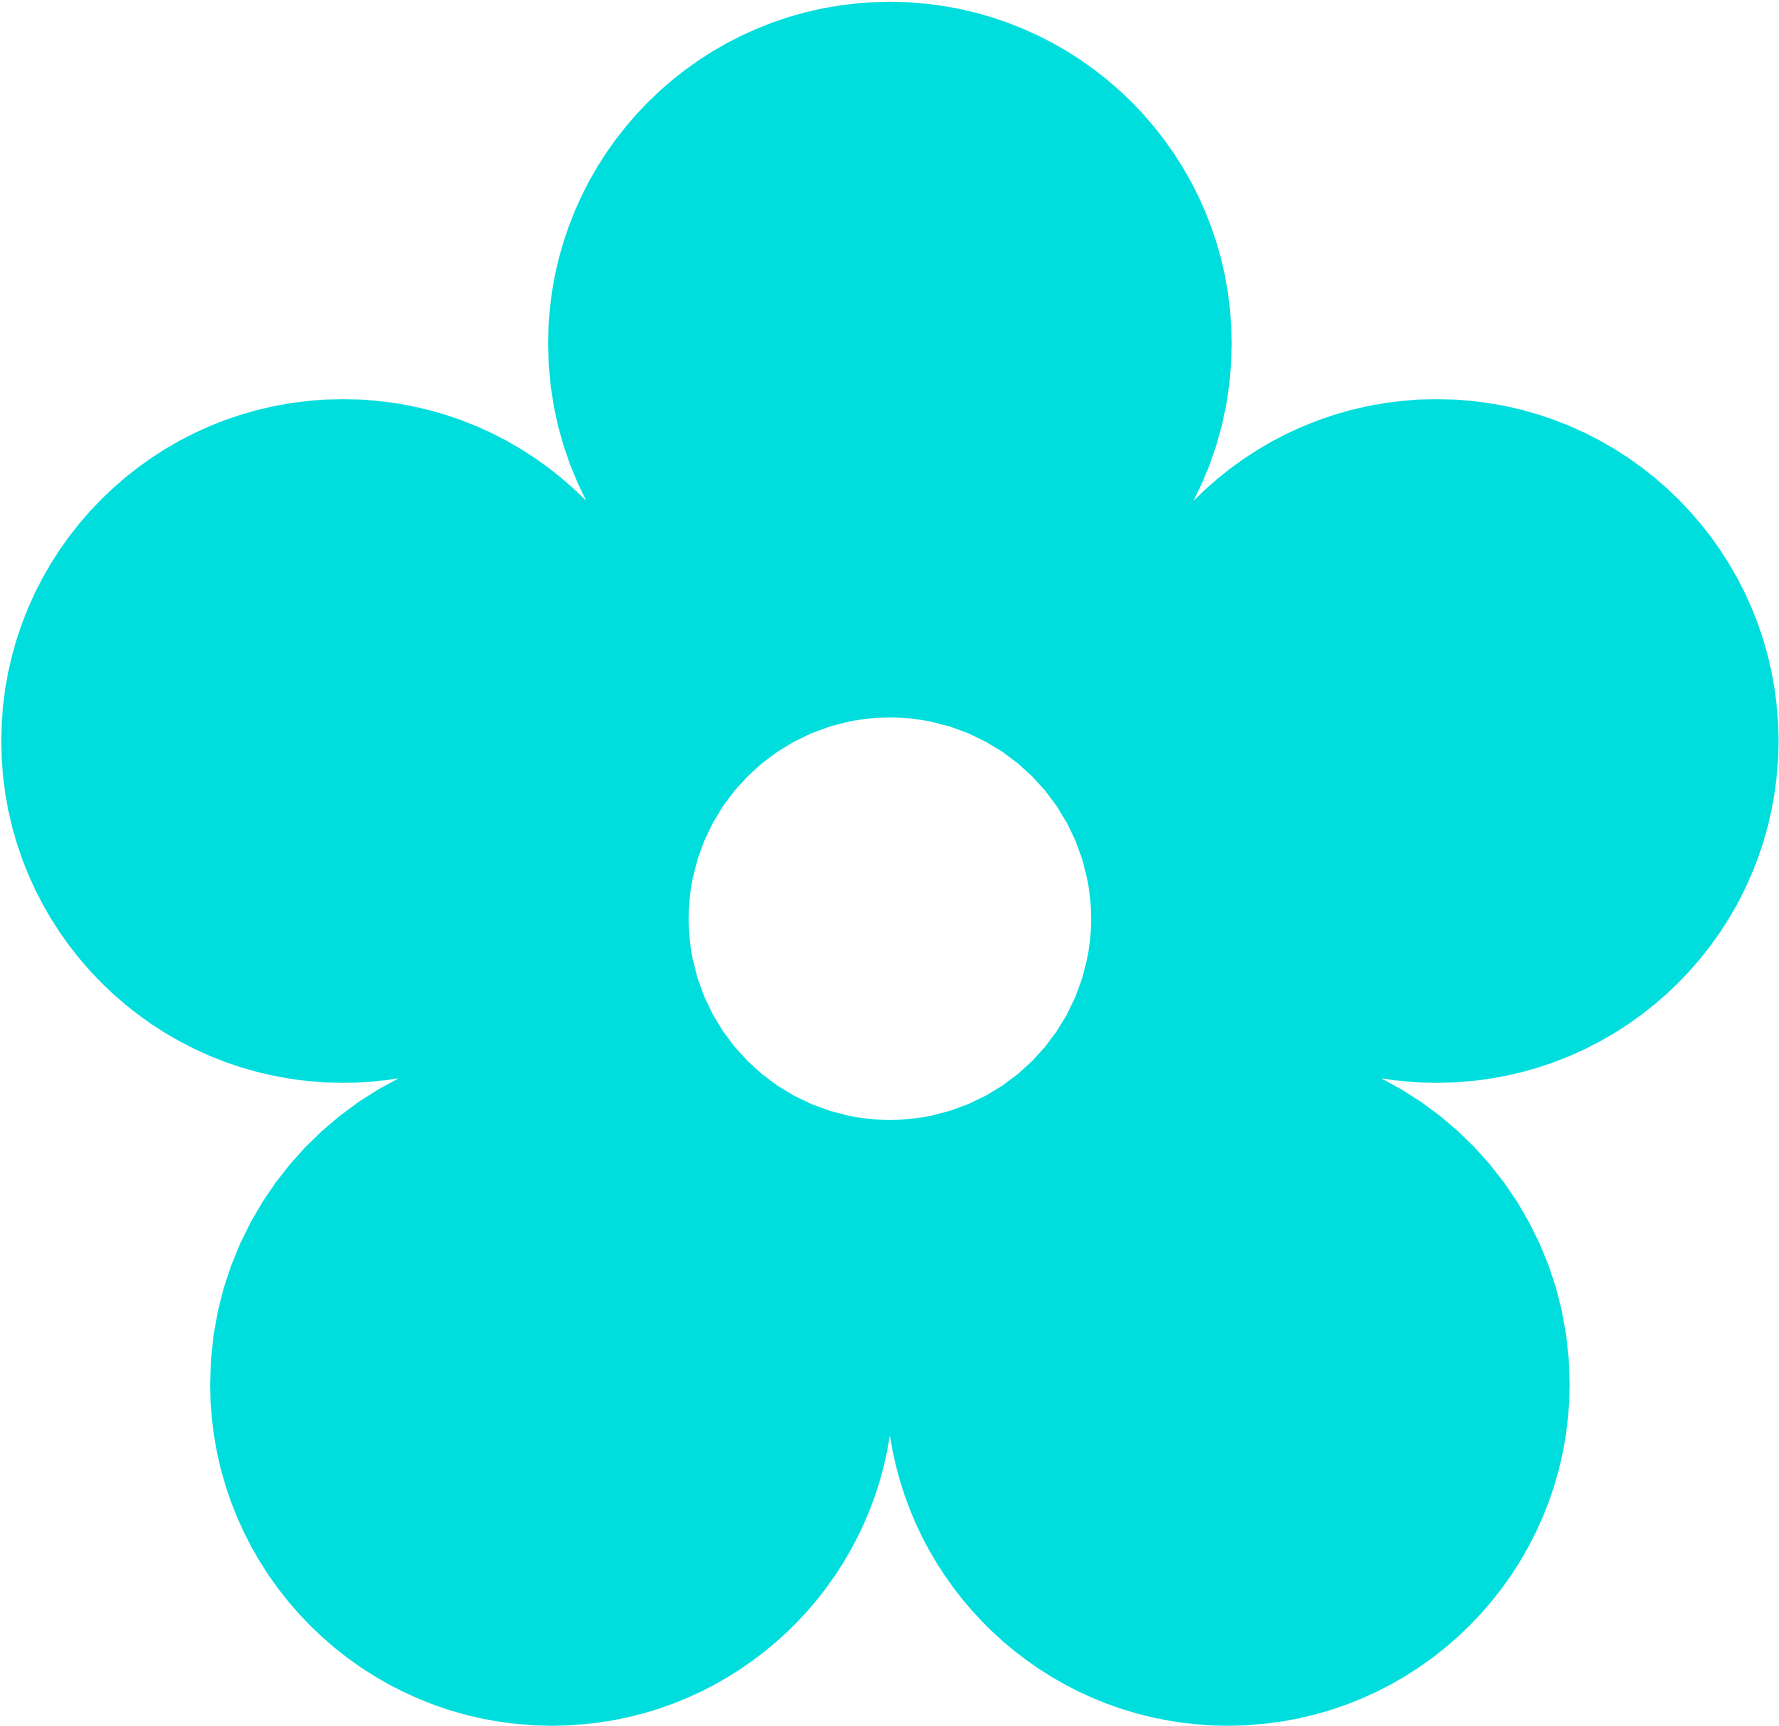 Retro Flower 1 Color Colour - Blue And Green Flower Clipart (1969x1952)